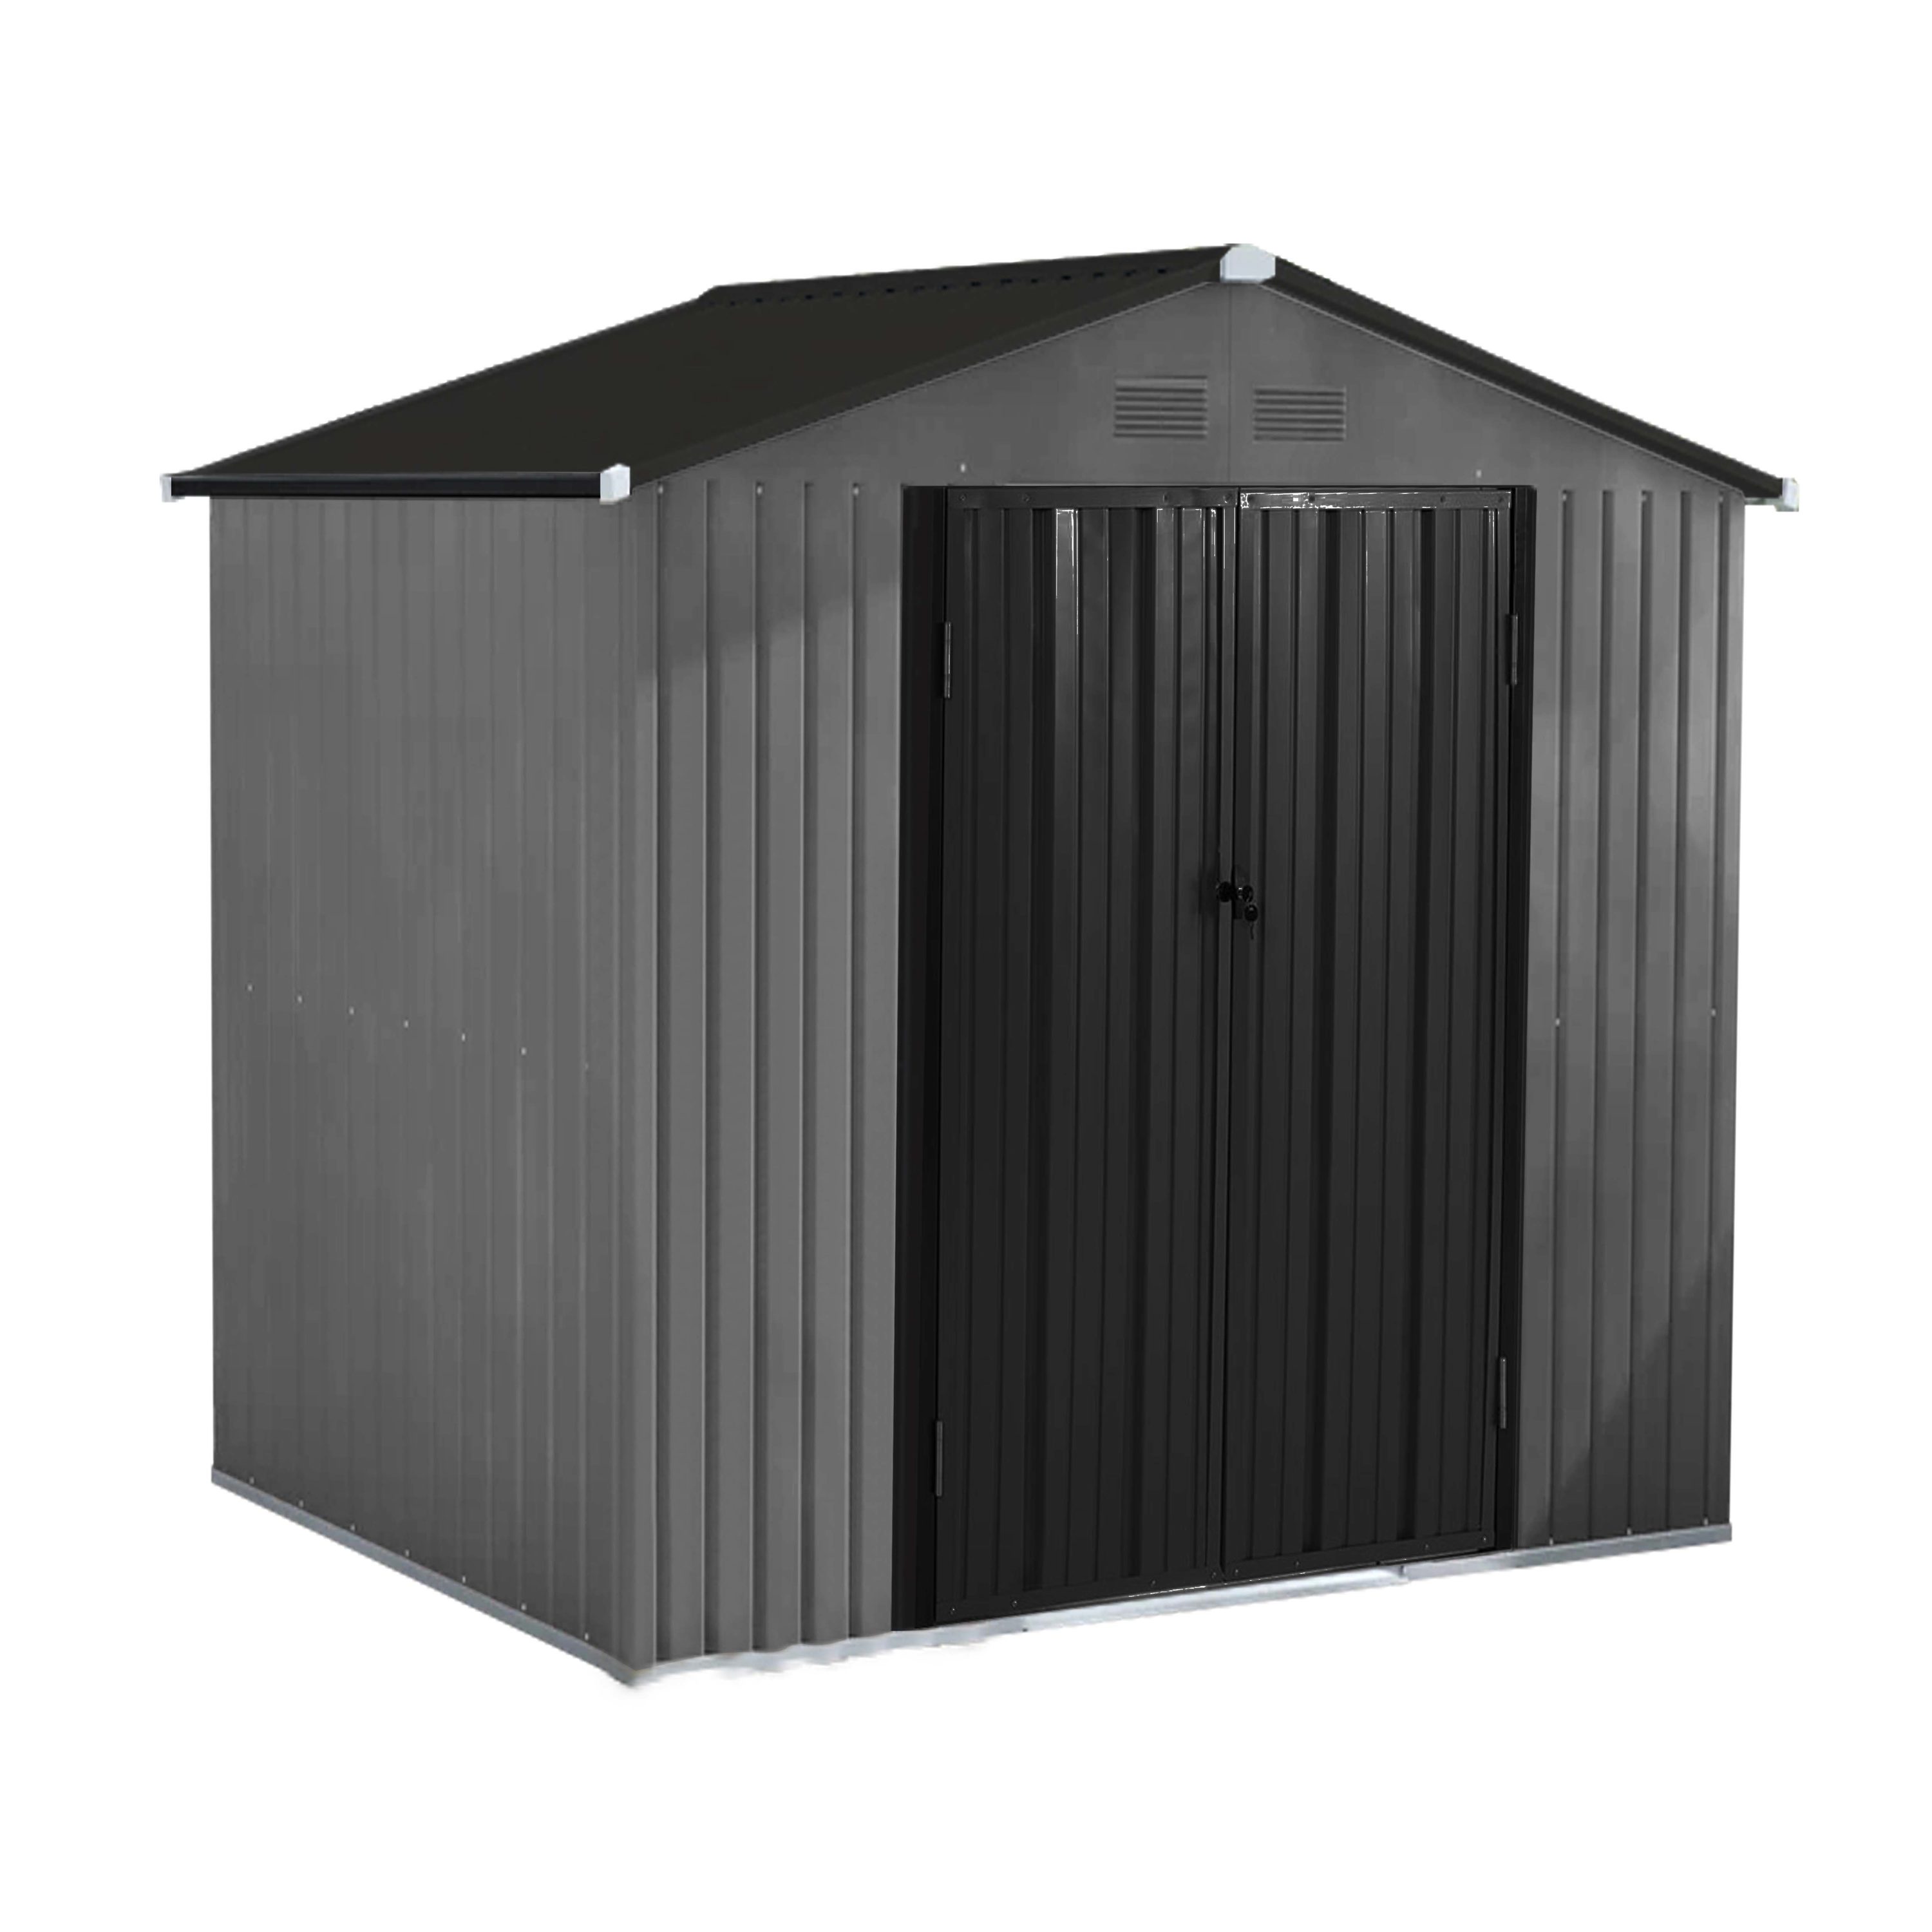 VEIKOUS 10-ft x 8-ft Galvanized Steel Storage Shed at Lowes.com